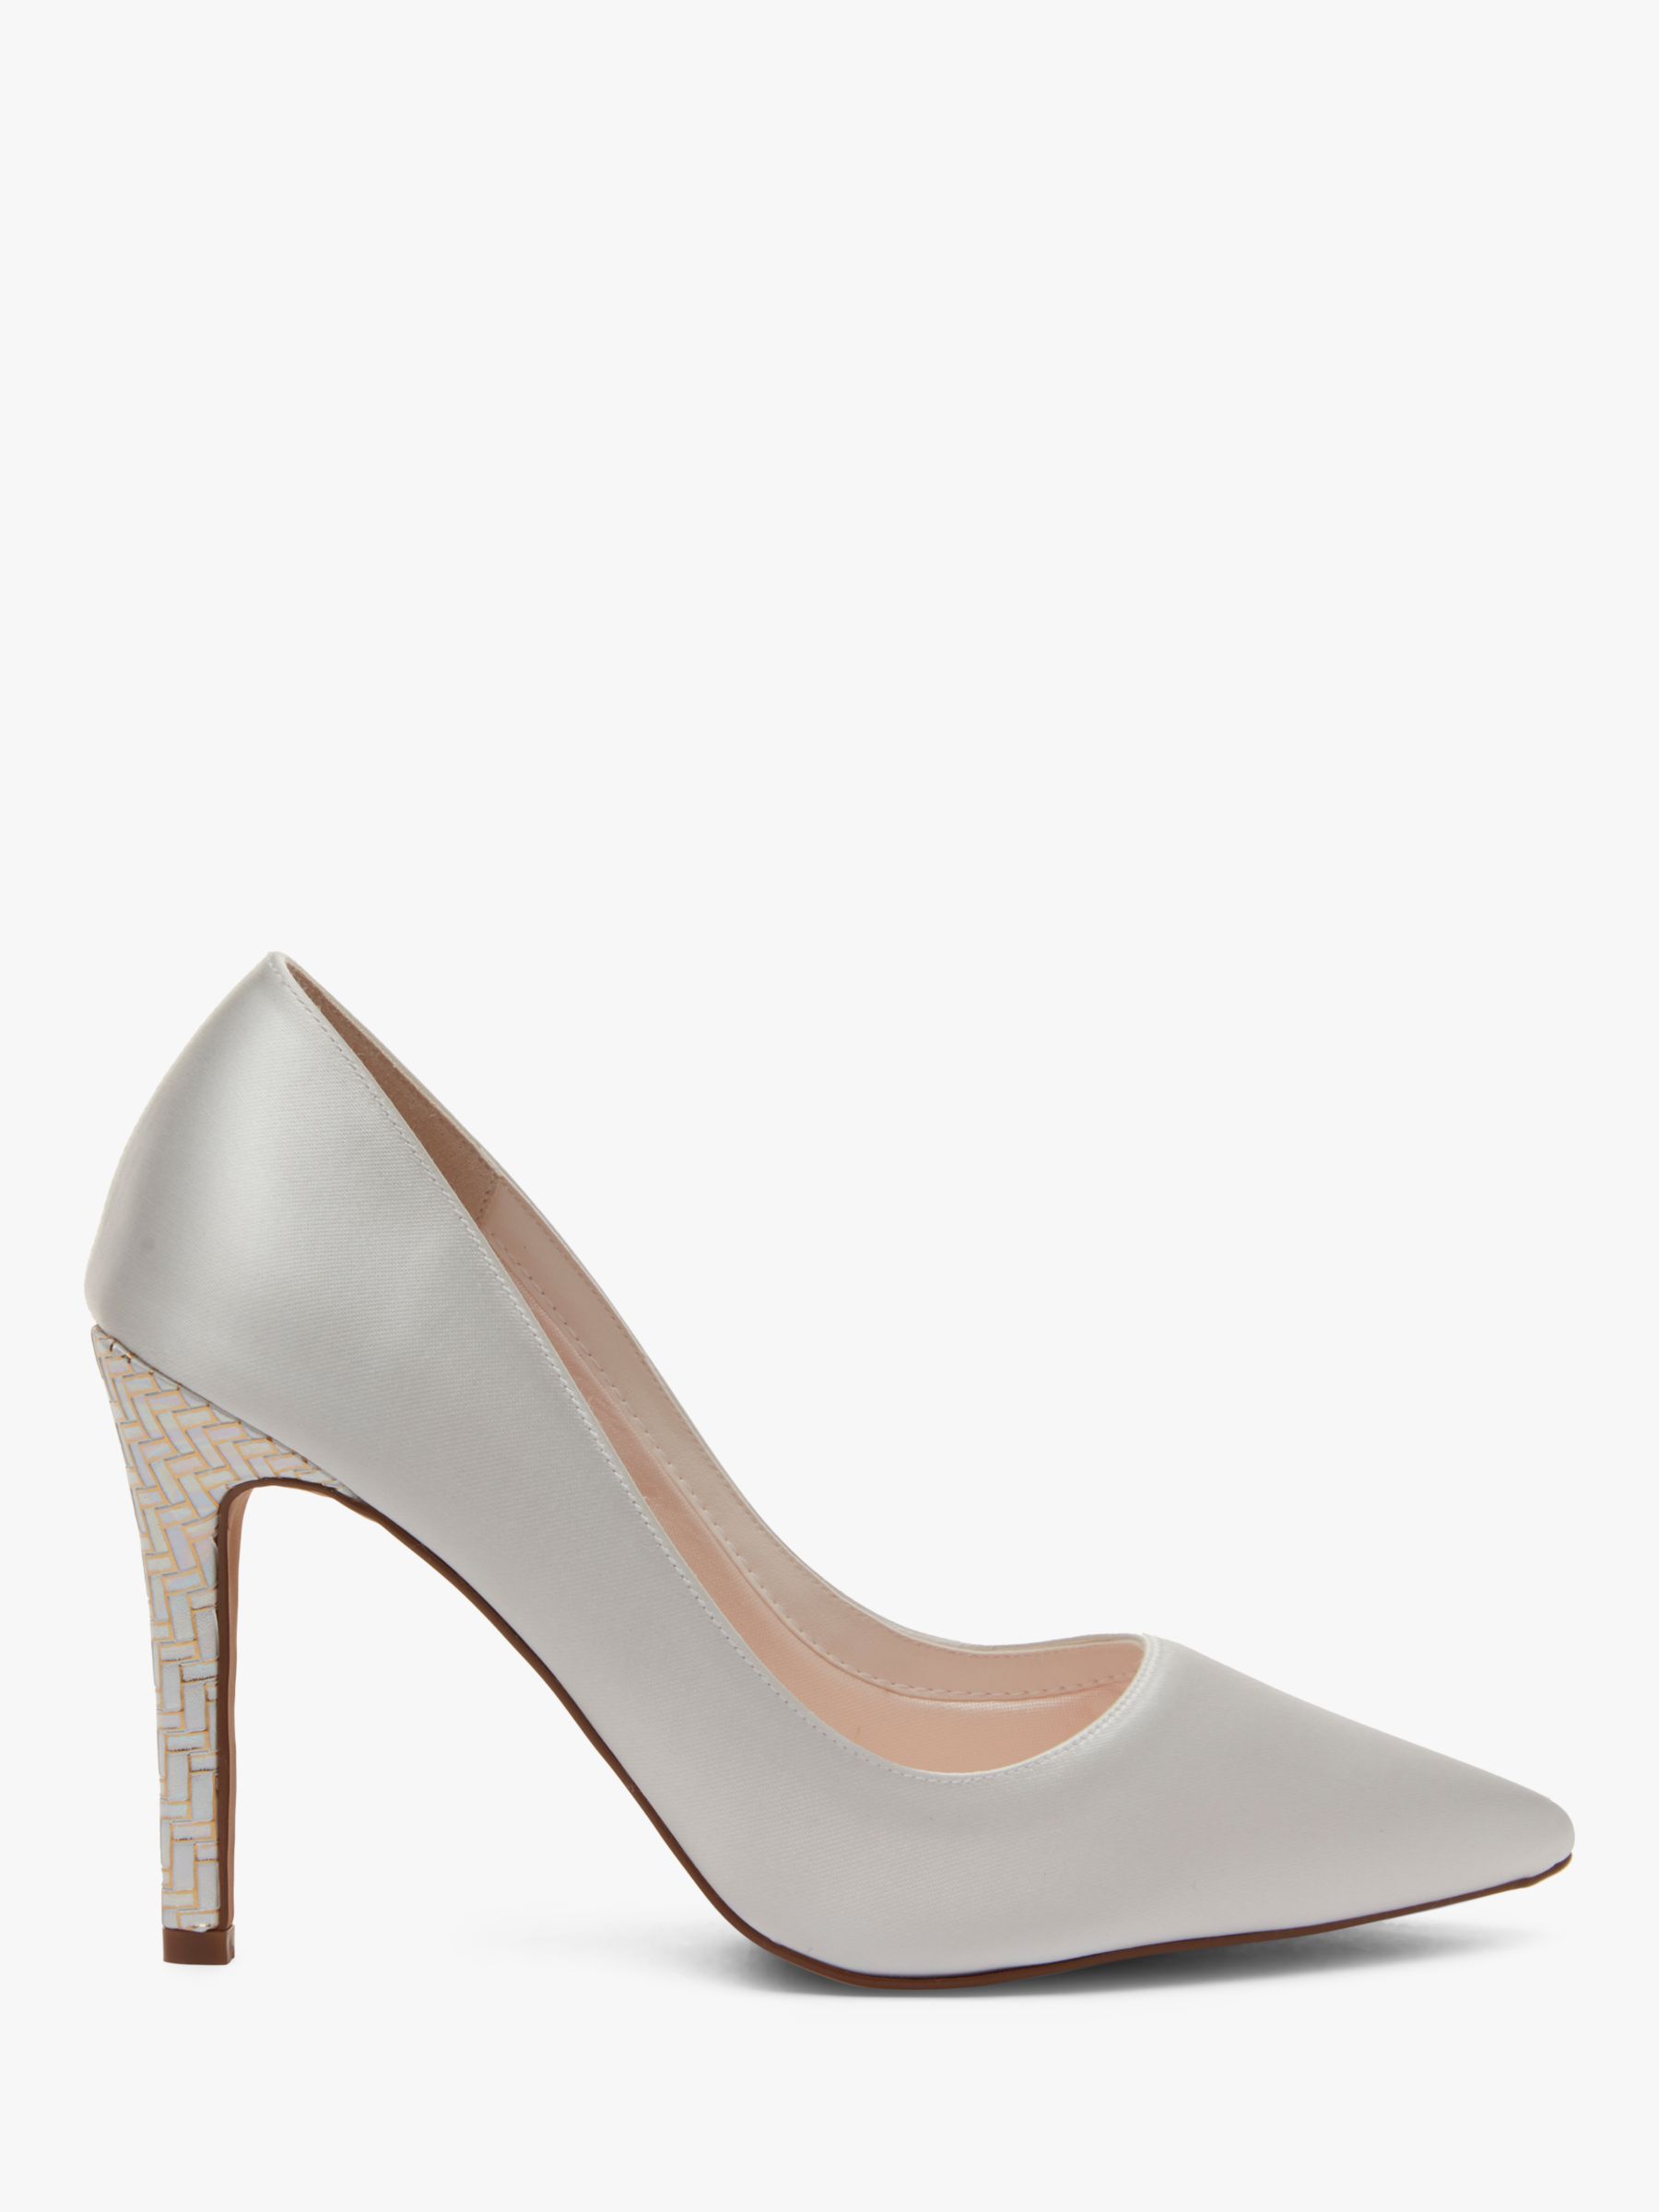 Rainbow Club Rochelle Satin Pointed Court Shoes, Ivory at John Lewis ...